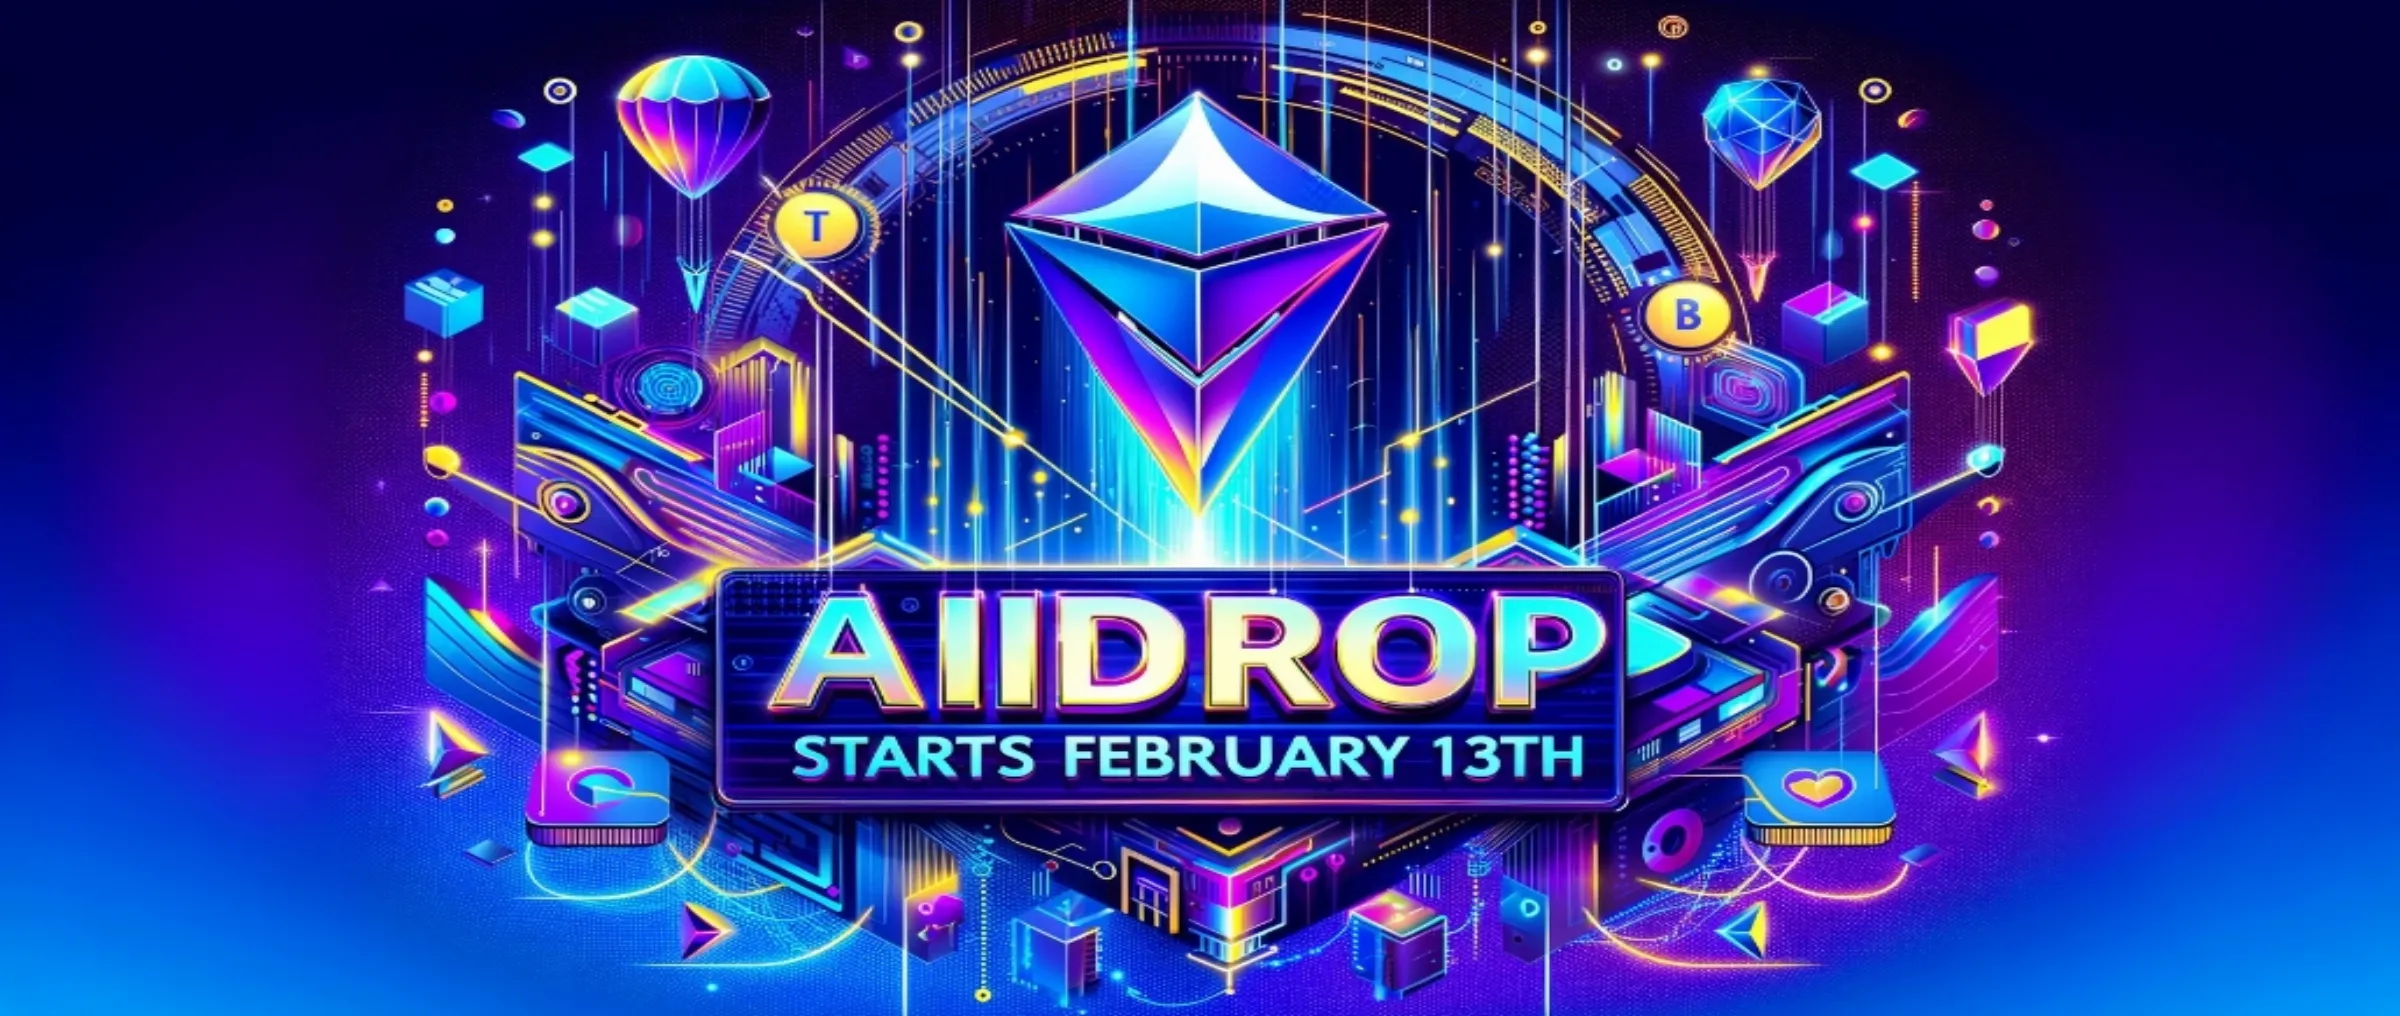 The launch of the KITE token airdrop is scheduled for February 13